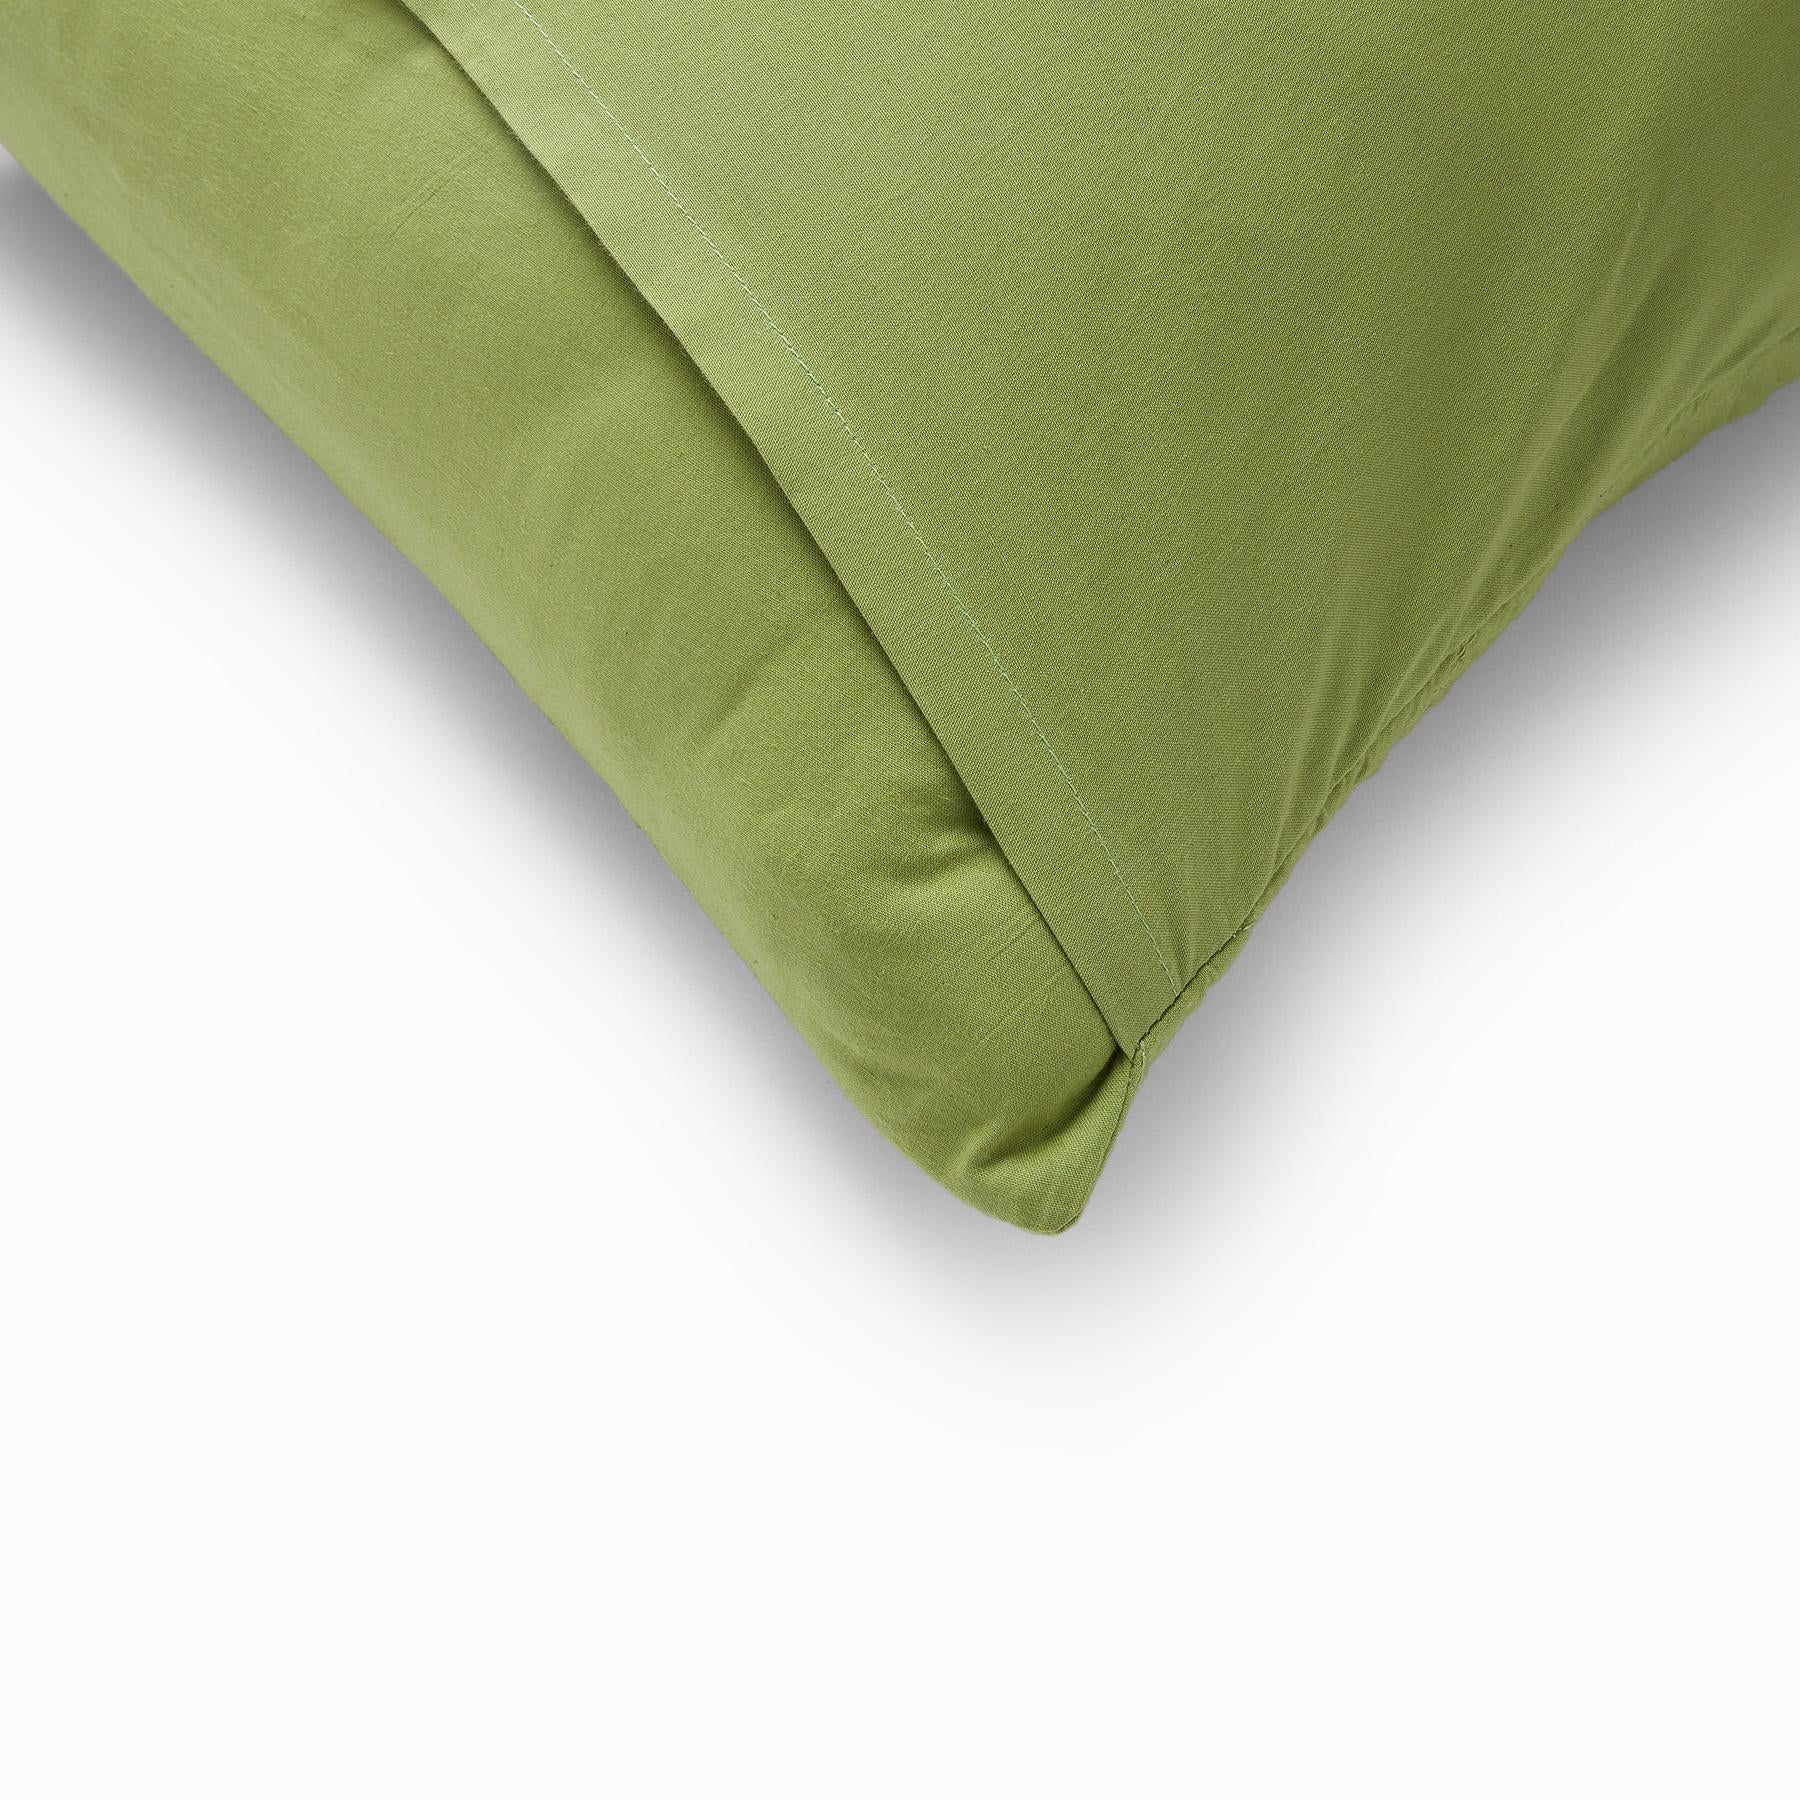 Fern Scallop Quilted Shams